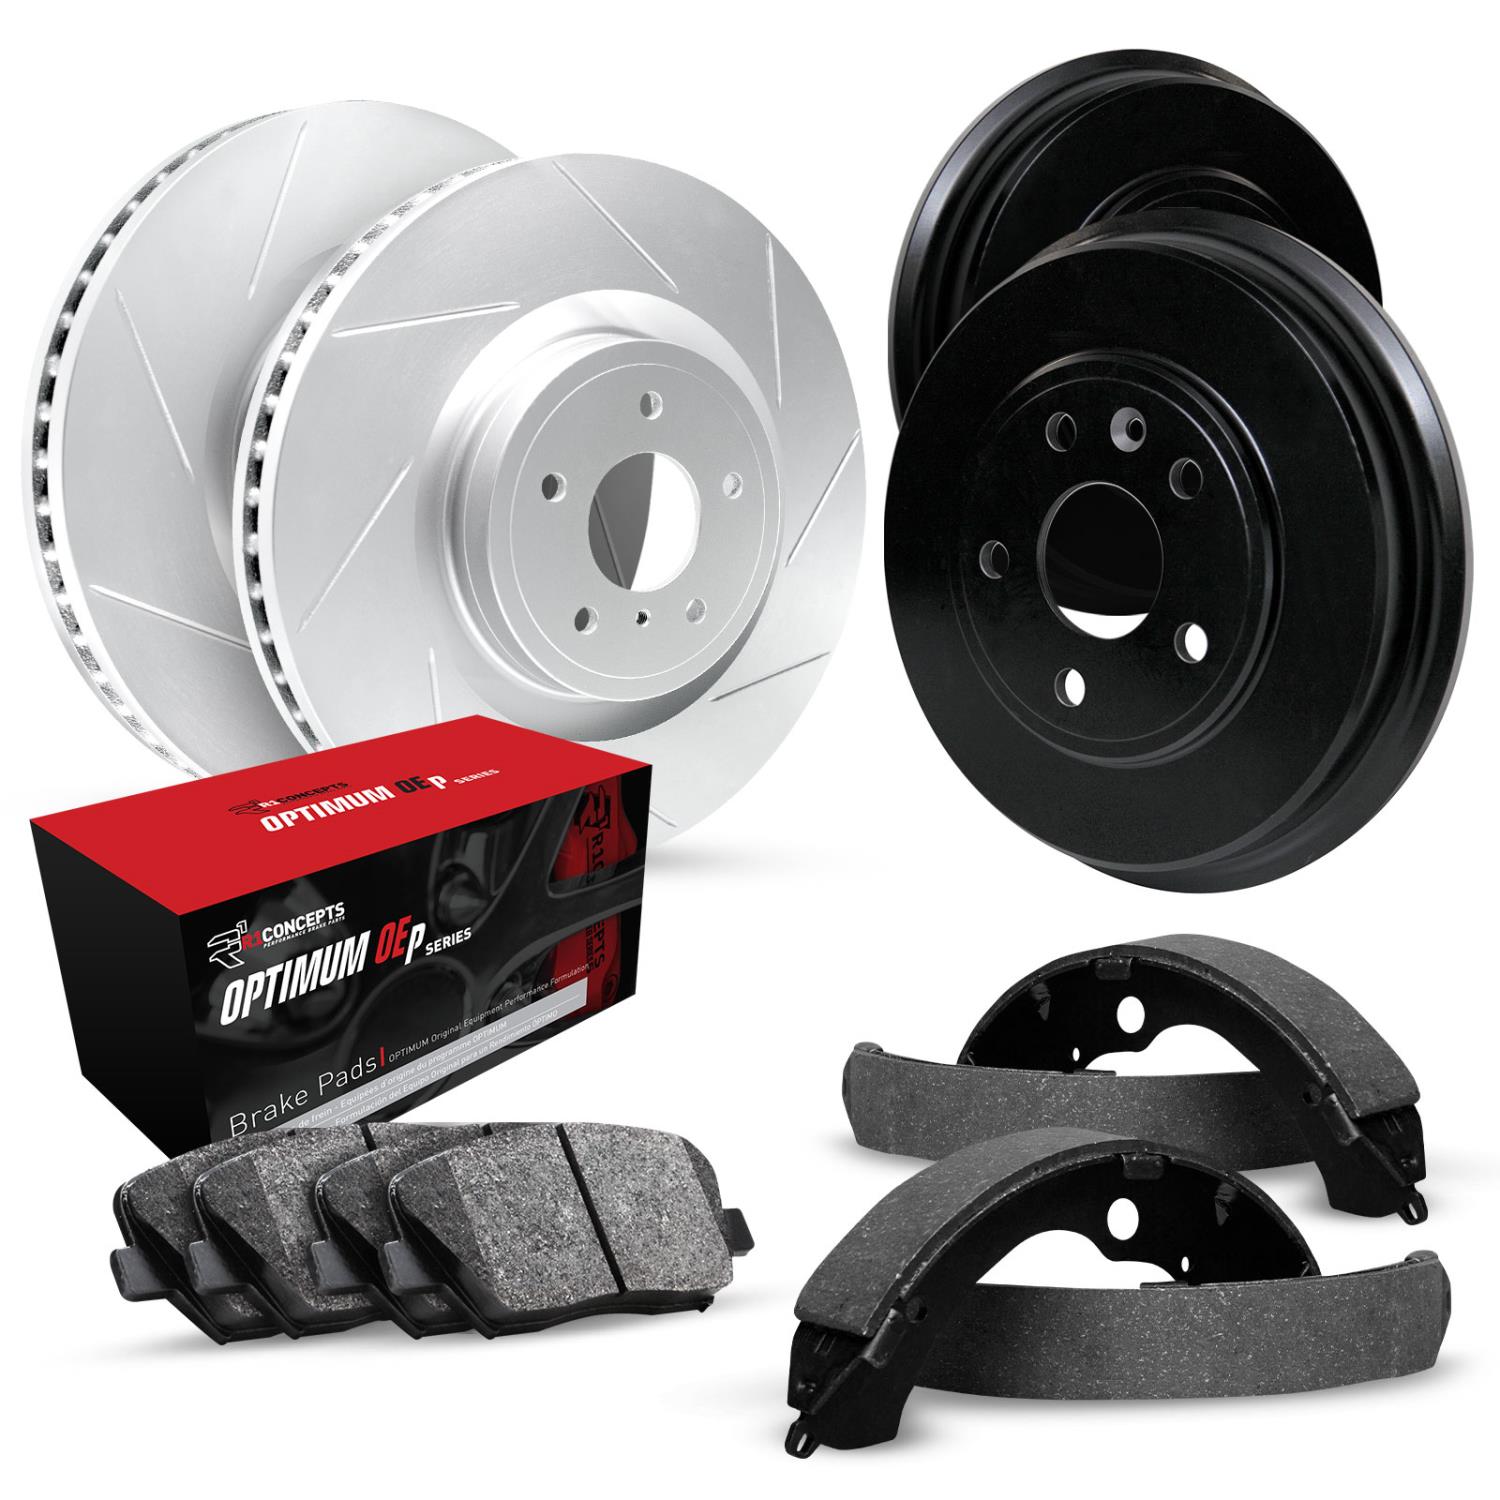 GEO-Carbon Slotted Brake Rotor & Drum Set w/Optimum OE Pads & Shoes, 2001-2002 Lexus/Toyota/Scion, Position: Front & Rear